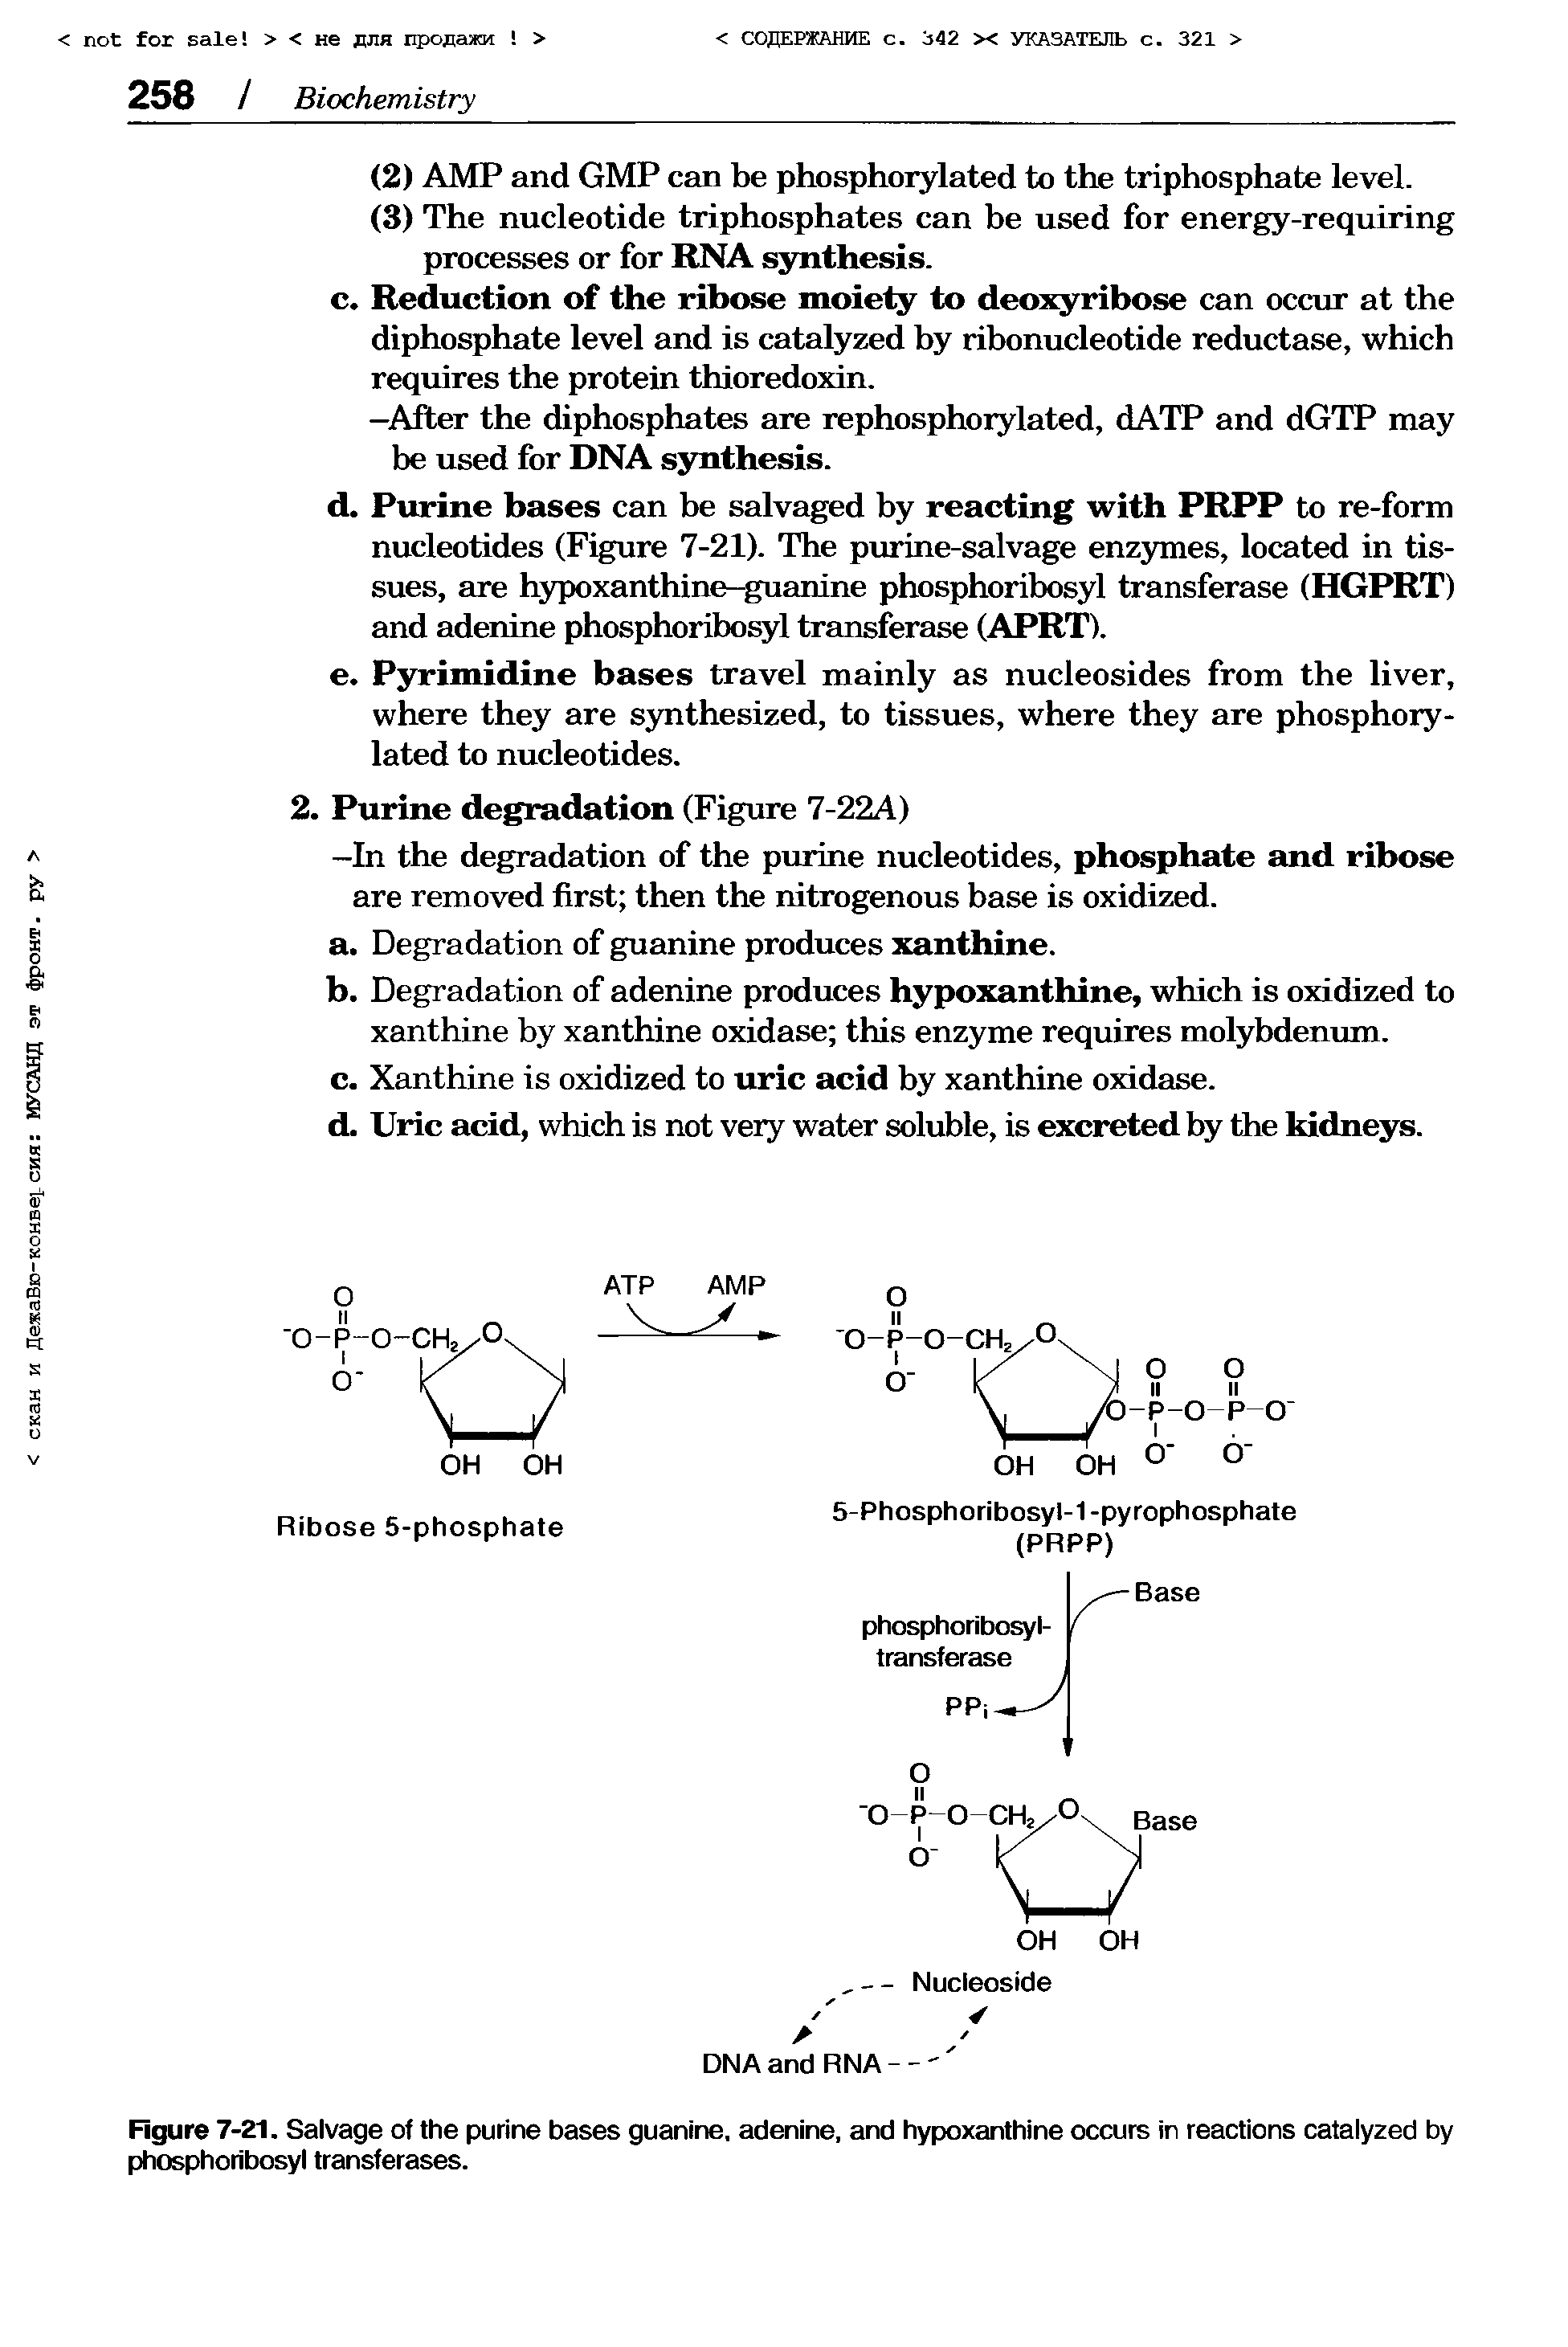 Figure 7-21. Salvage of the purine bases guanine, adenine, and hypoxanthine occurs in reactions catalyzed by phosphoribosyl transferases.